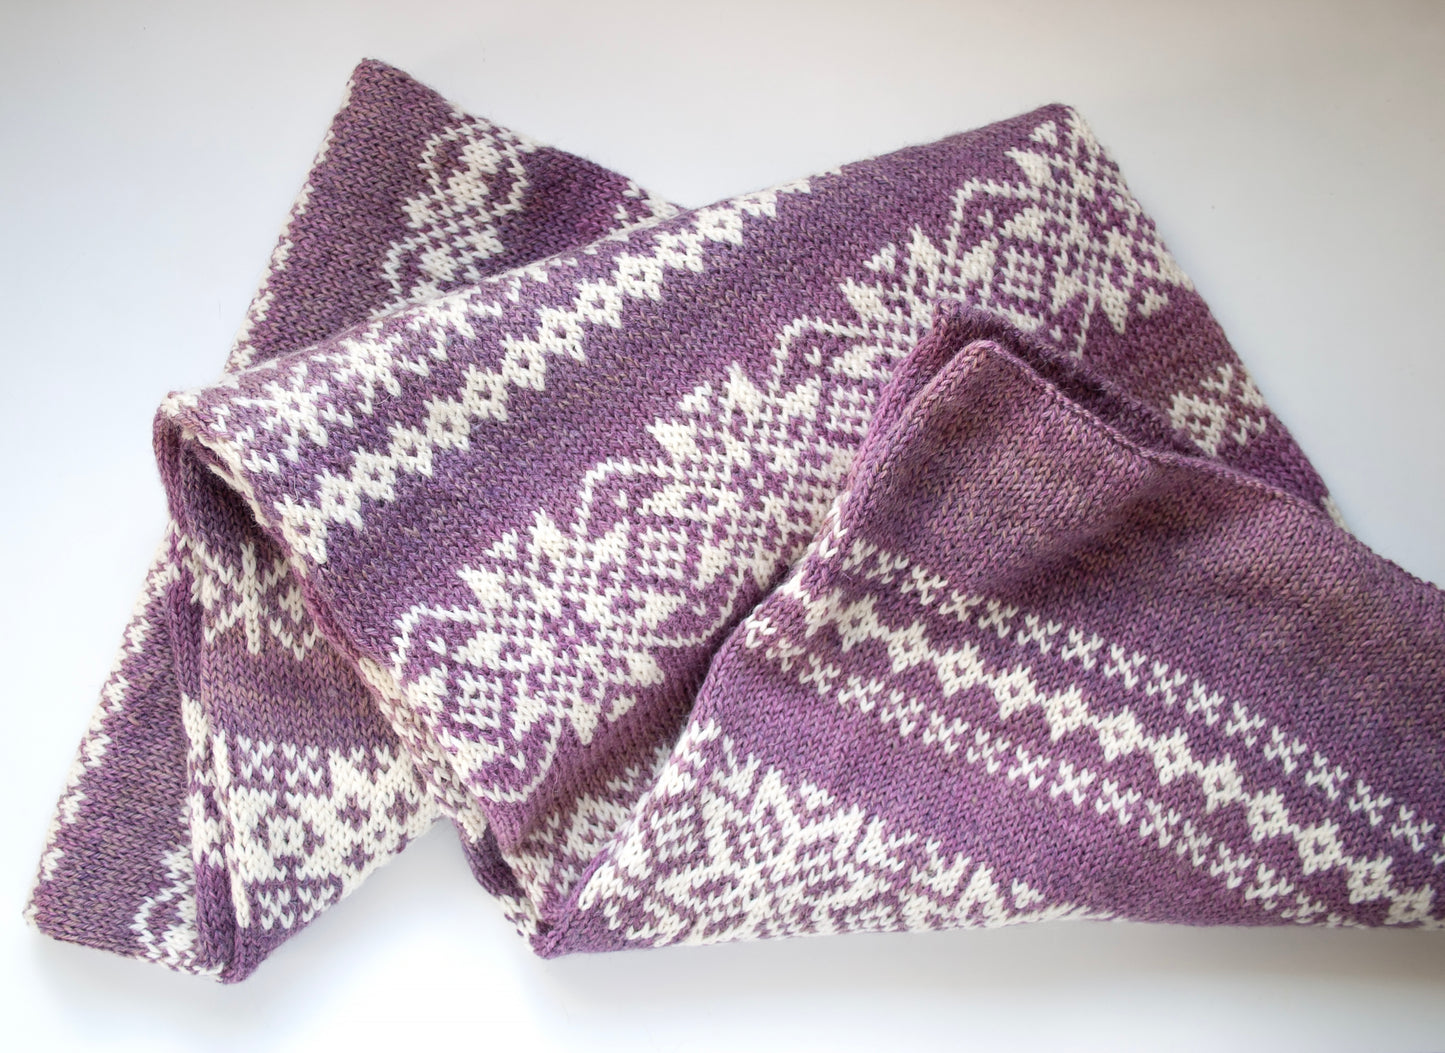 gradient purple and white wool hole hand-knitted Fair isle scarf in snowflake knitting pattern